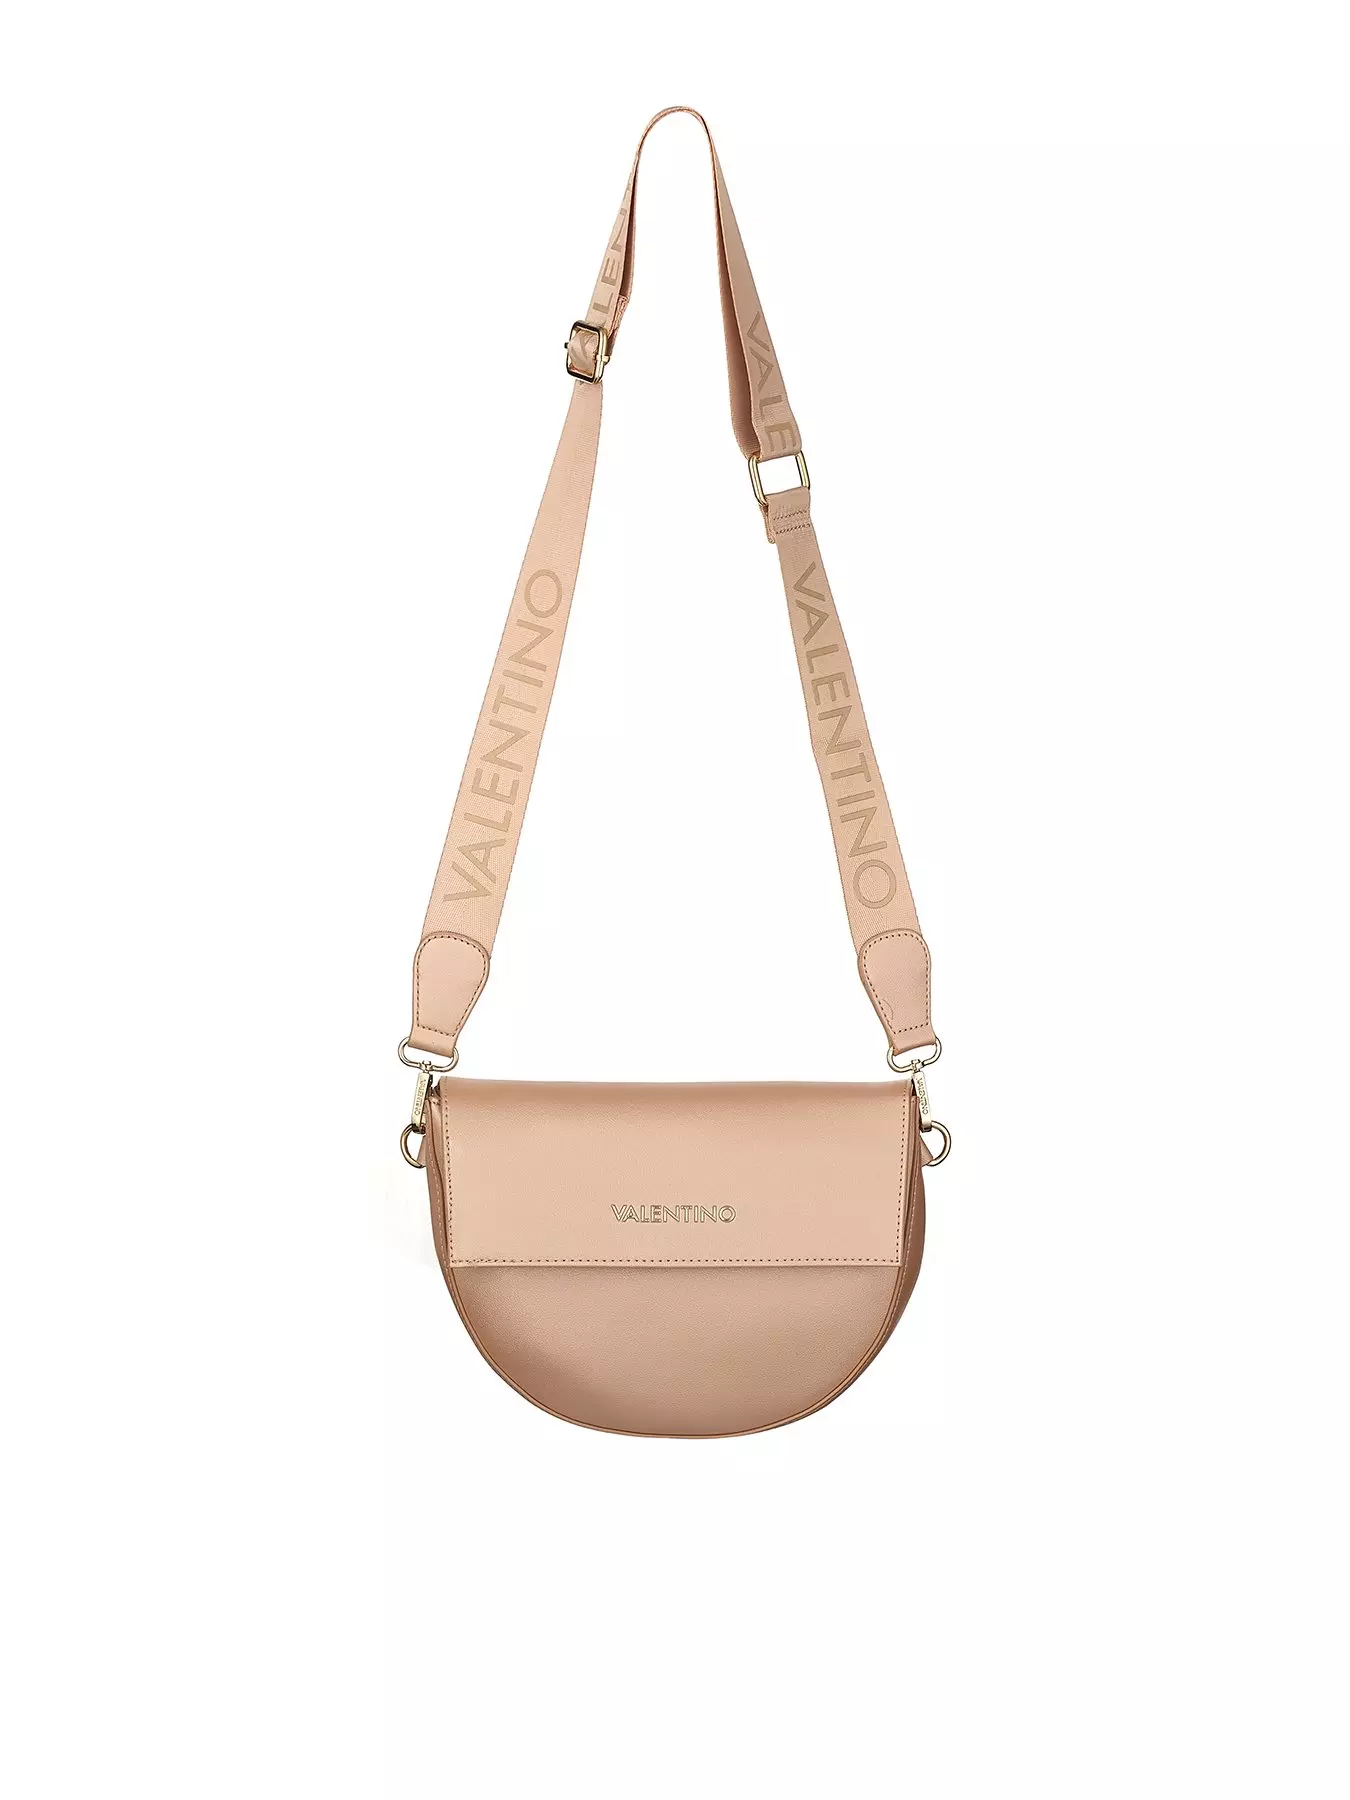 Valentino Bags SALE • Up to 50% discount • SuperSales UK